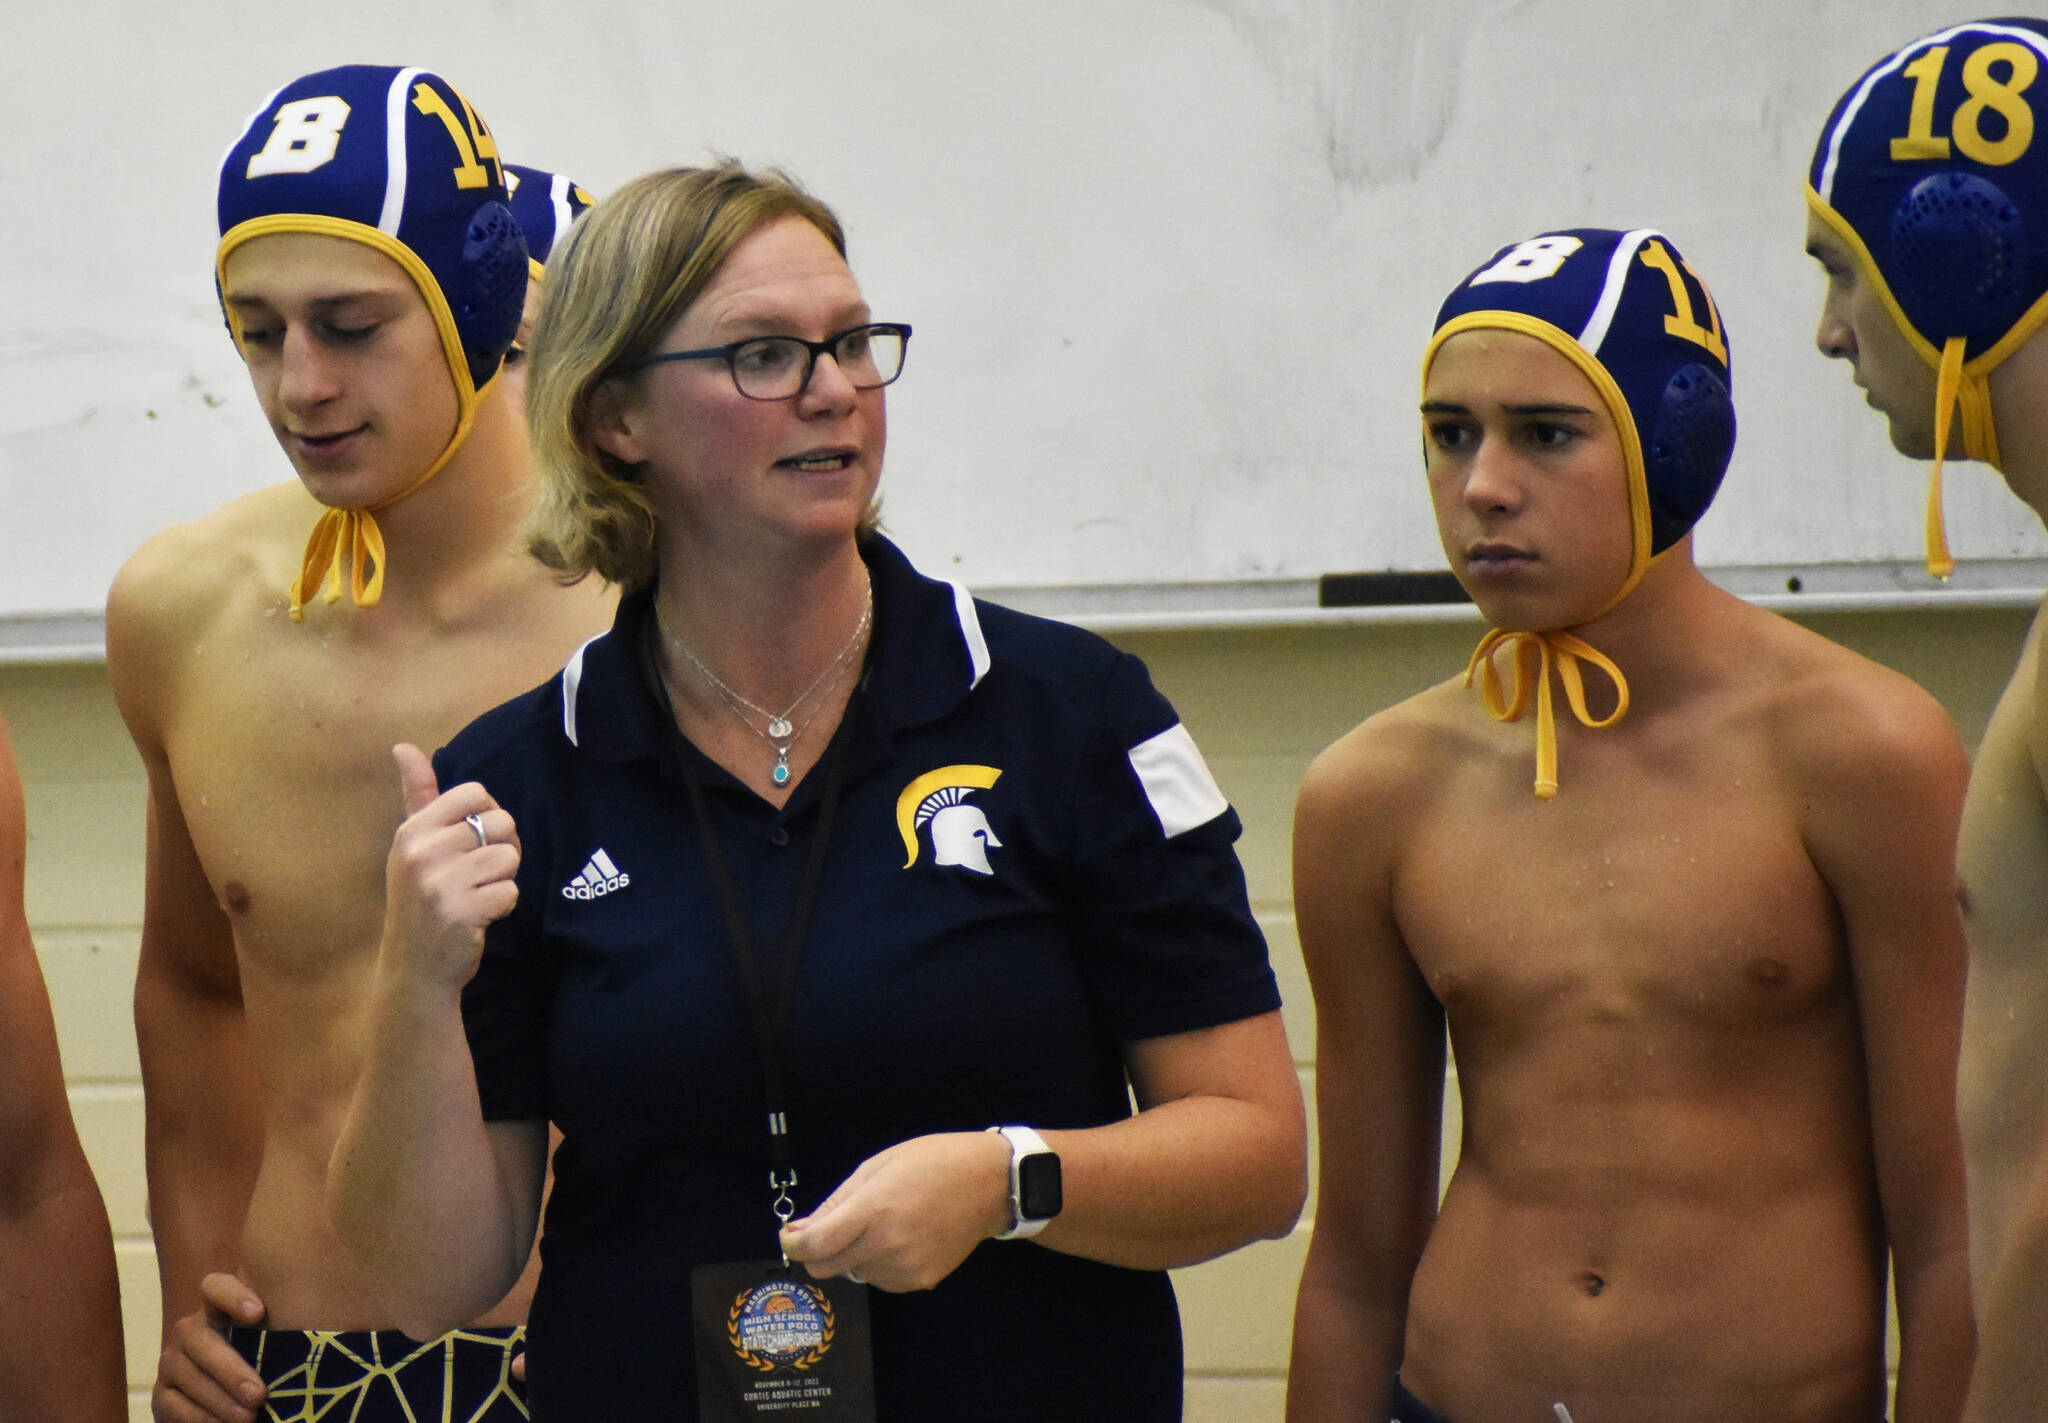 File Photos
Kristen Gellert will try and bring Bainbridge water polo back to the top.